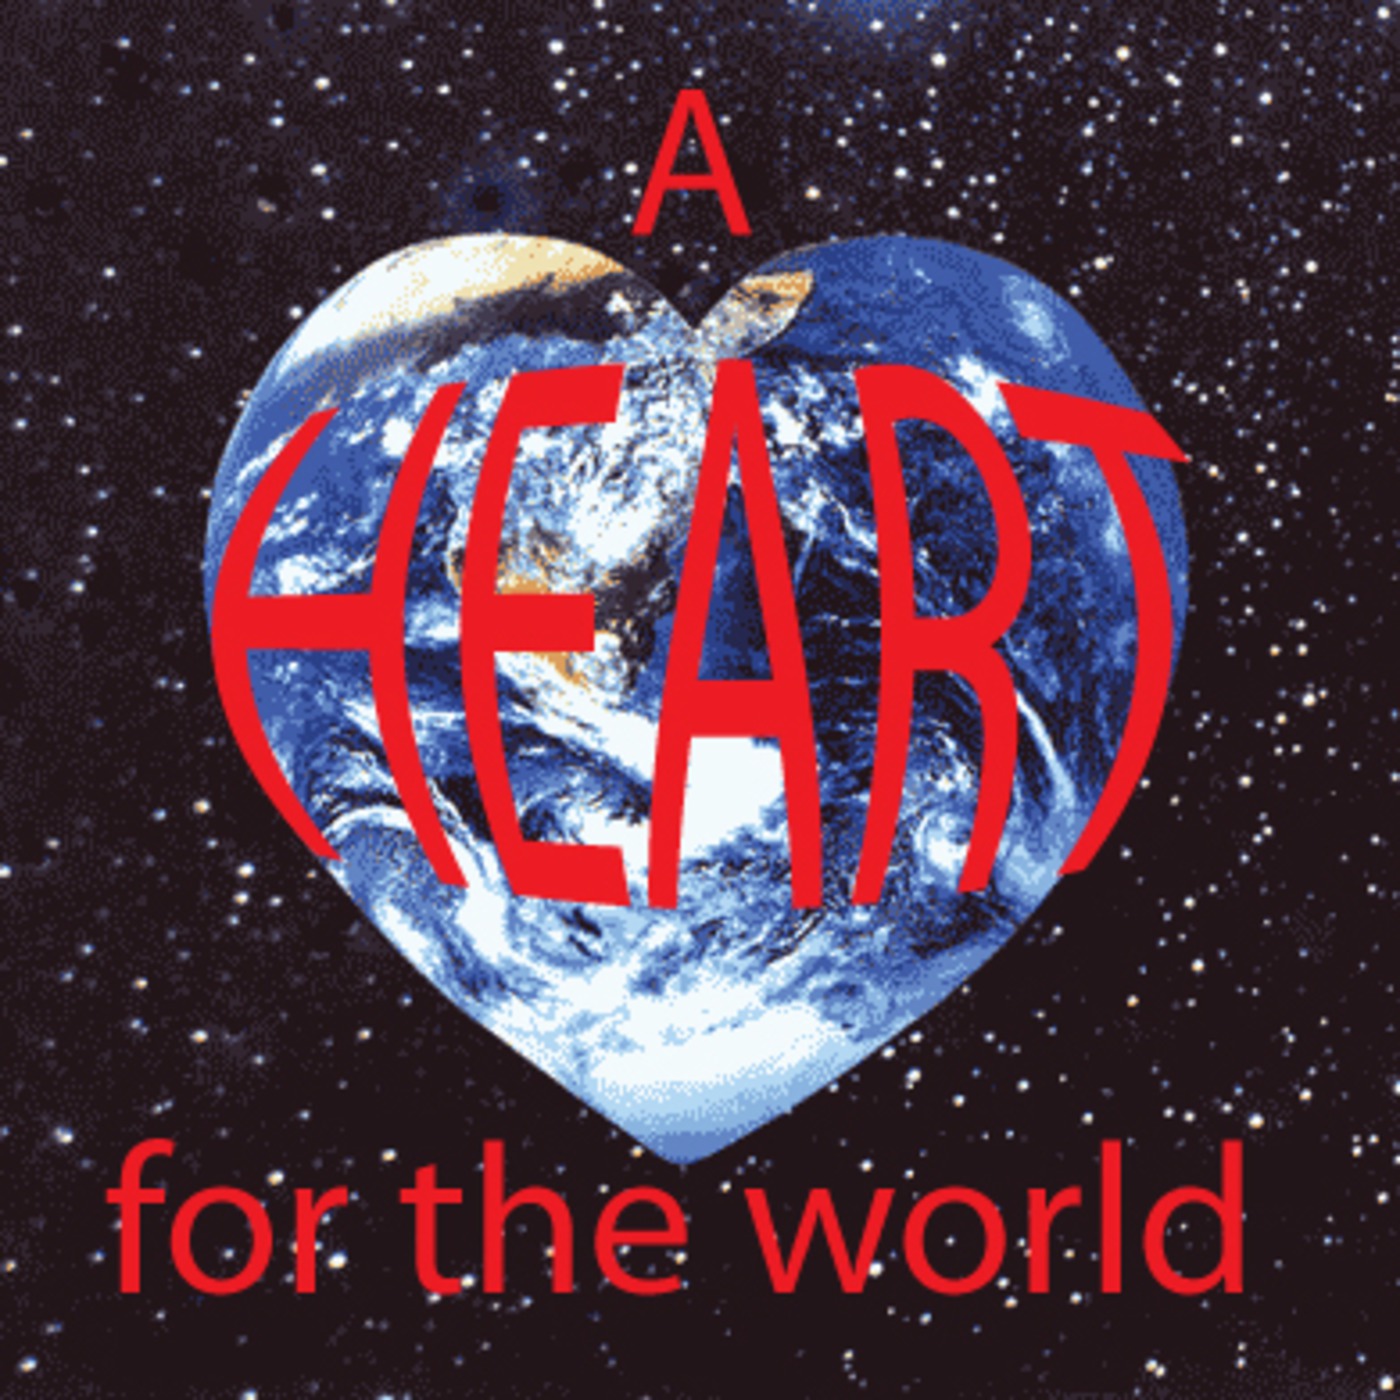 A Heart for the World - I Once Was Blind But Now I see